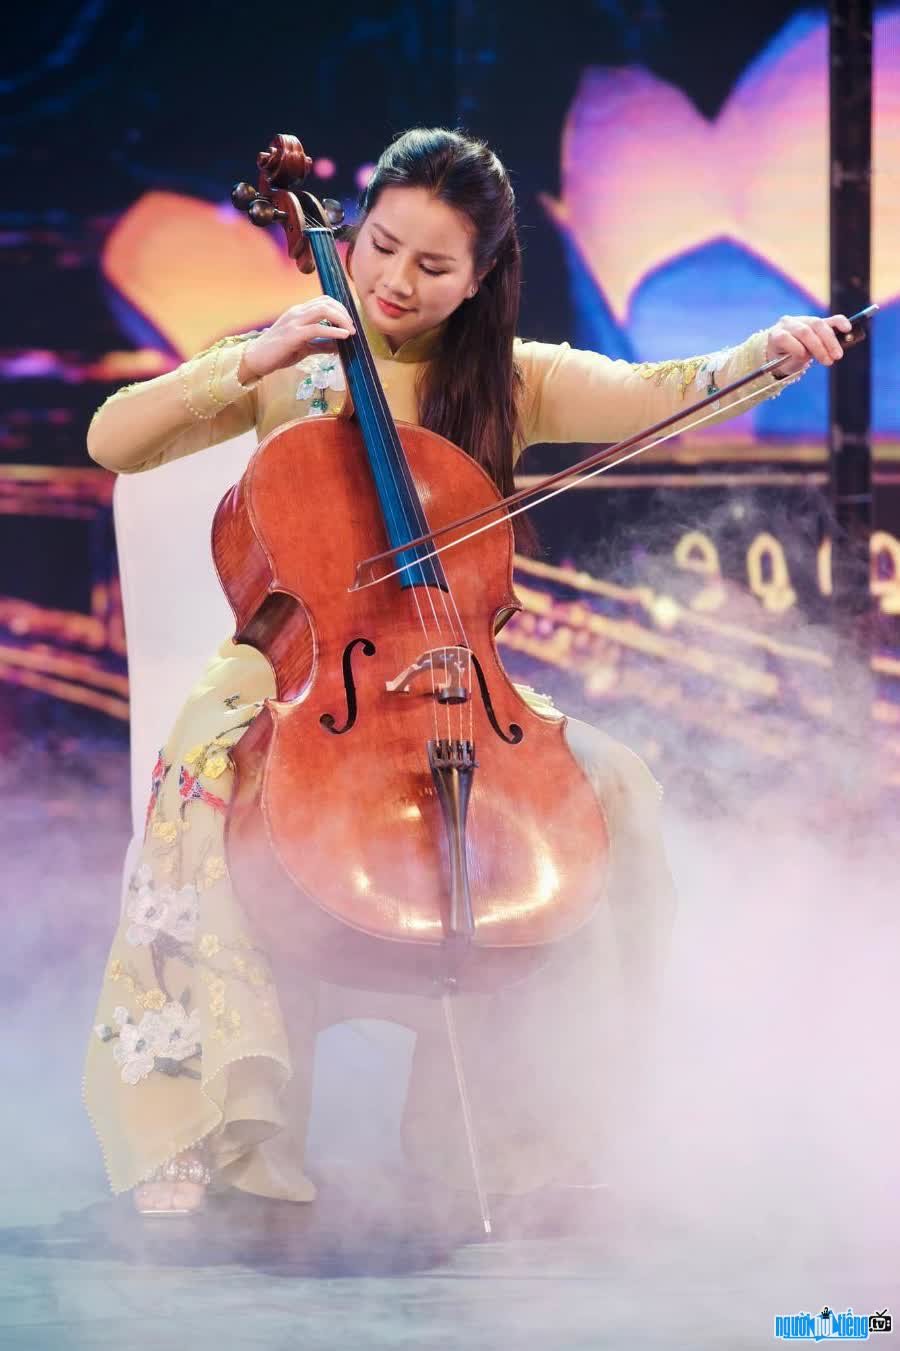 Image of cellist Ha Mien performing on stage